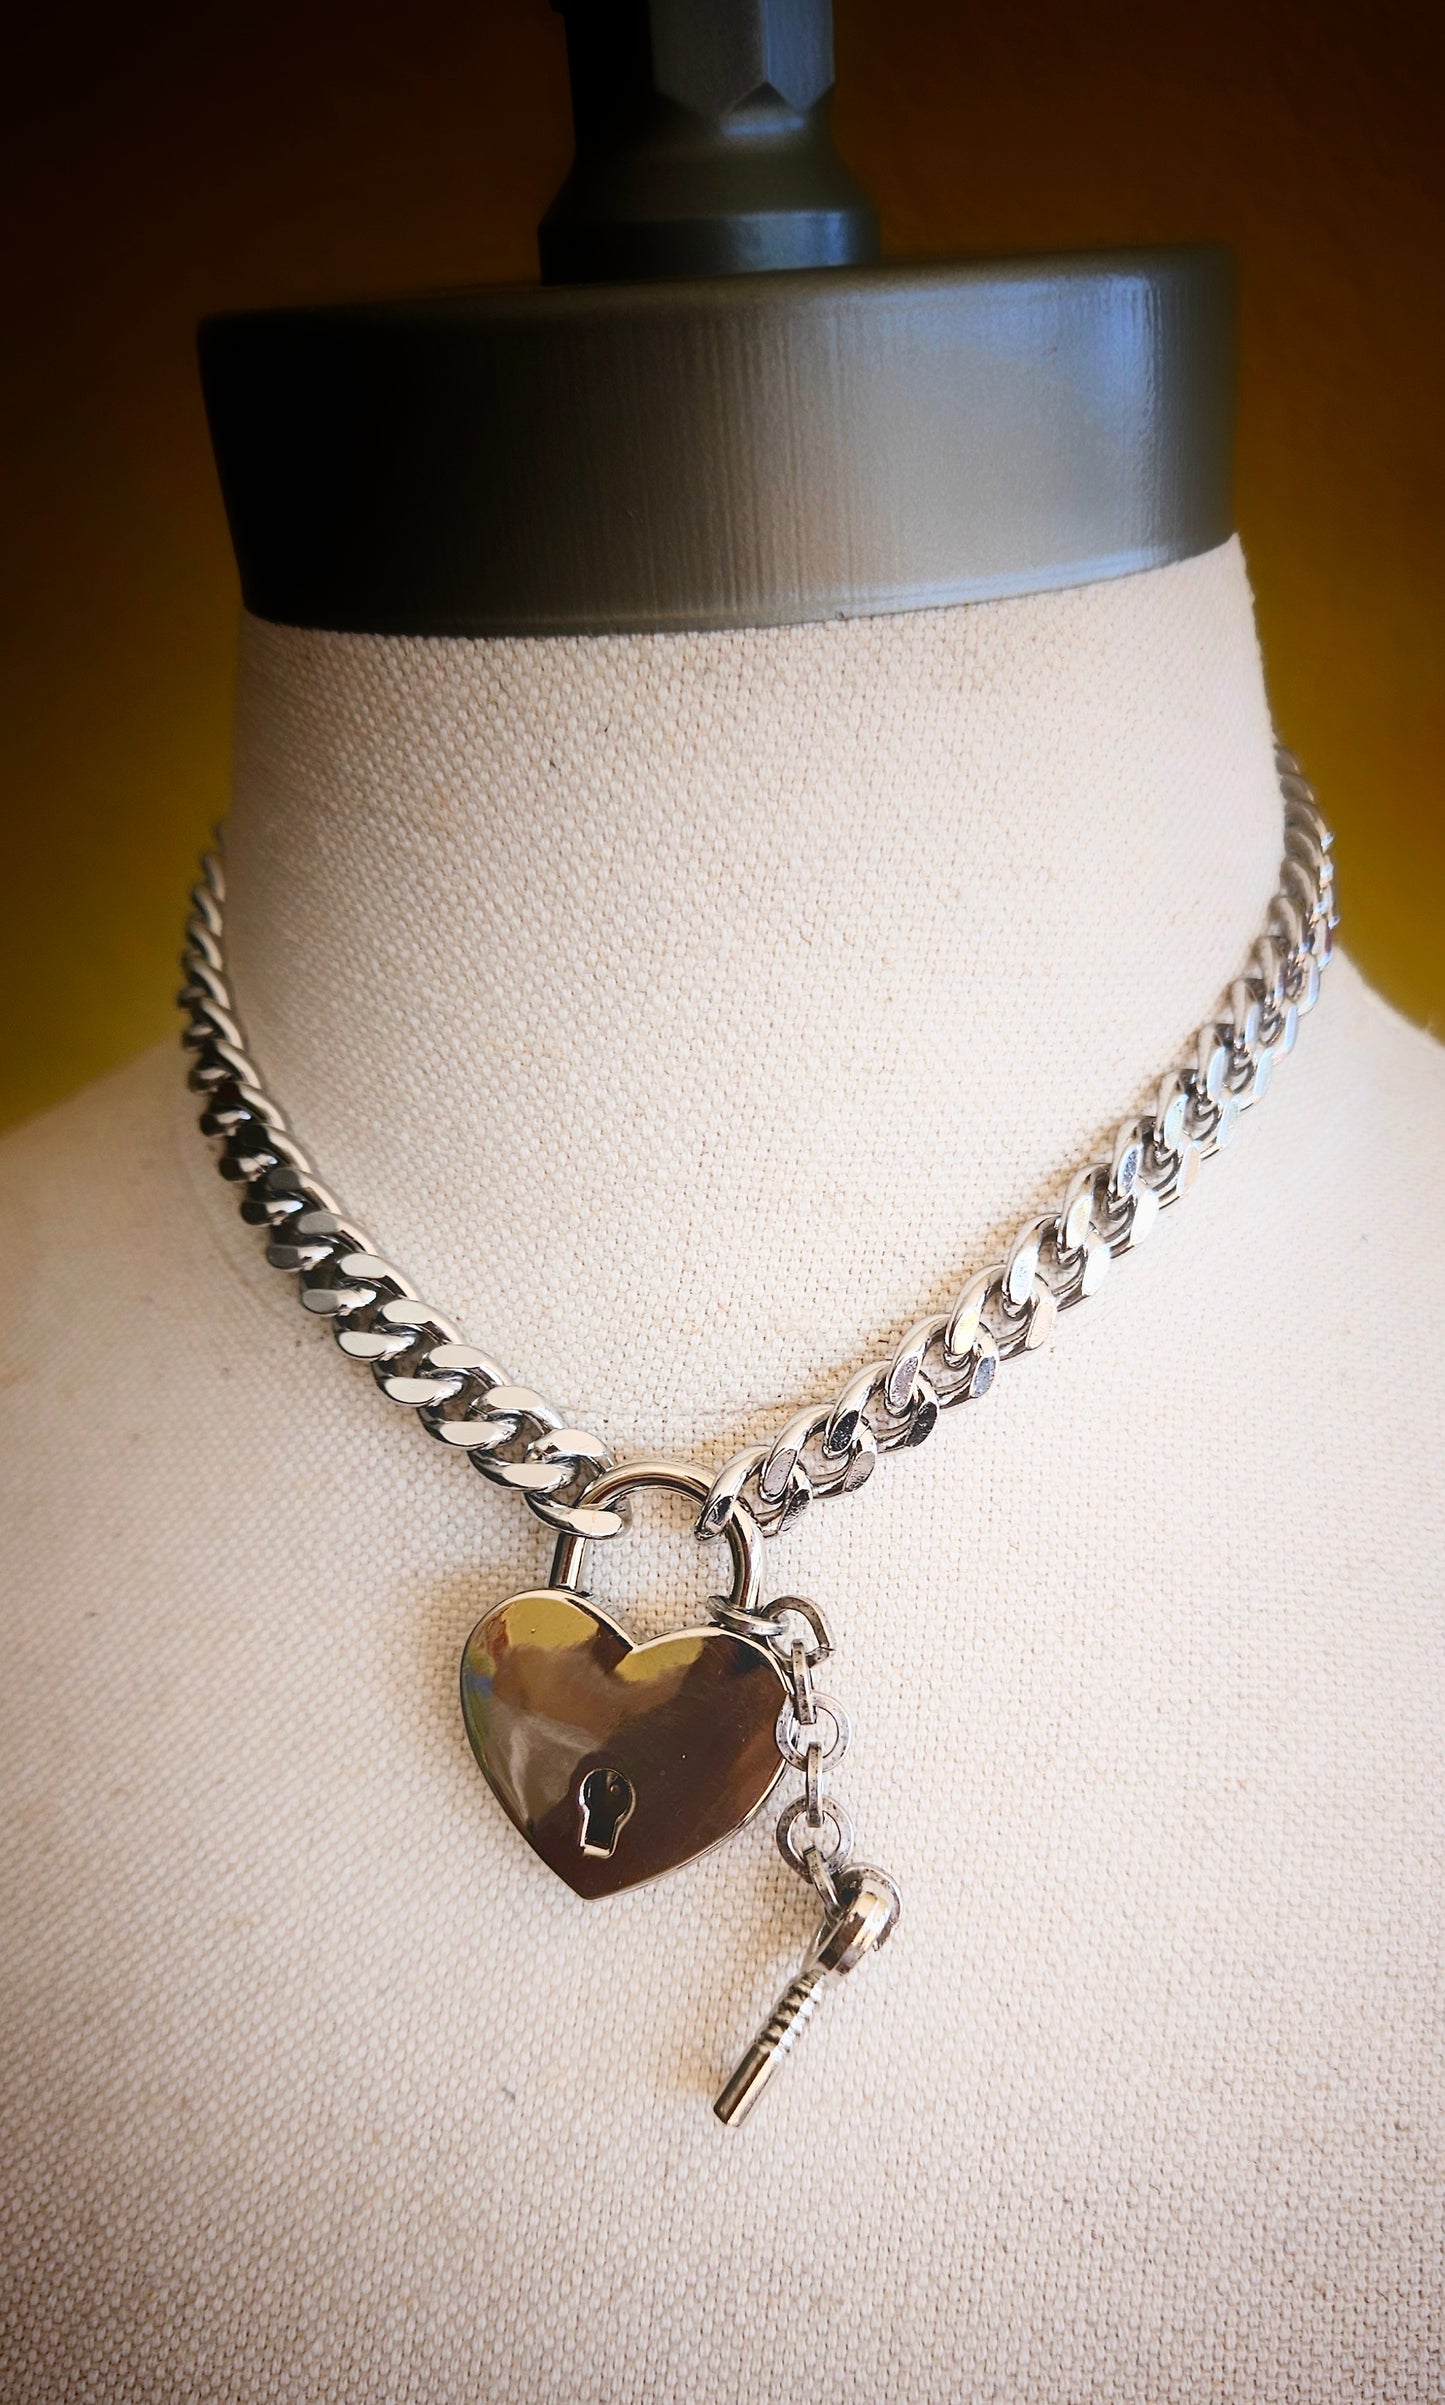 Stainless steel heart lock necklace